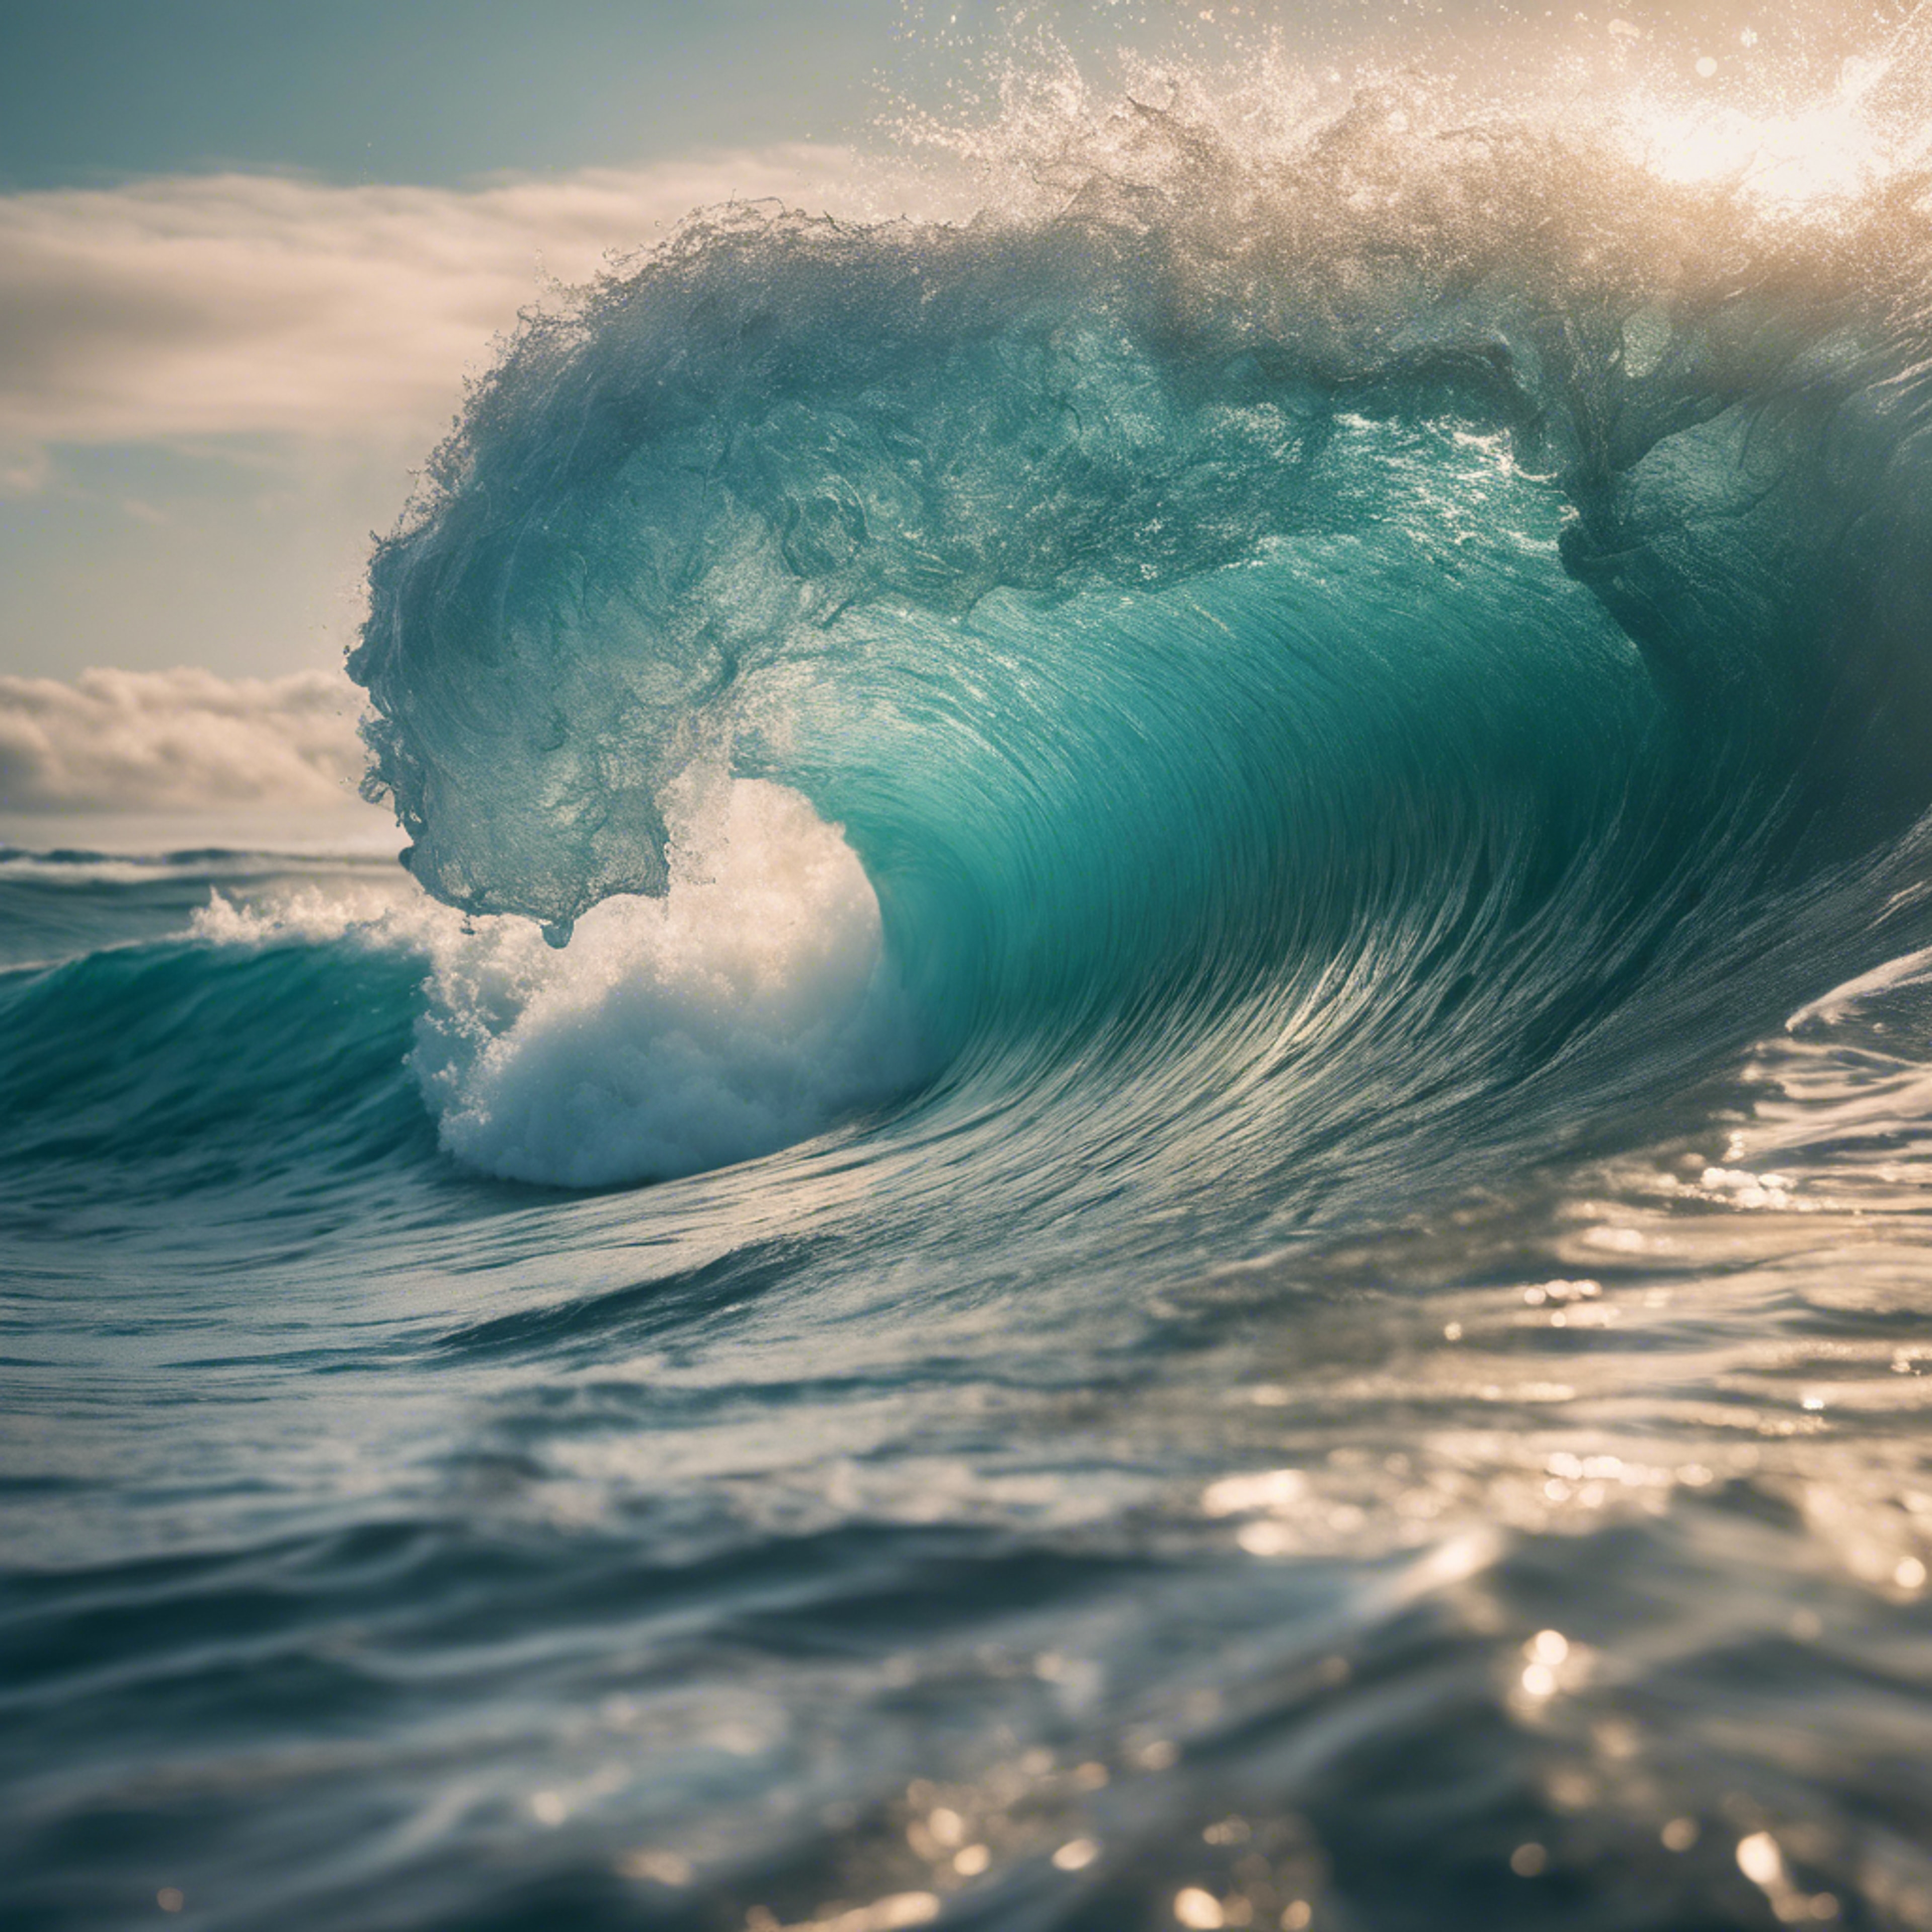 A powerful ocean wave about to crash, casting a cool teal hue. 墙纸[600fa377246440af9acb]